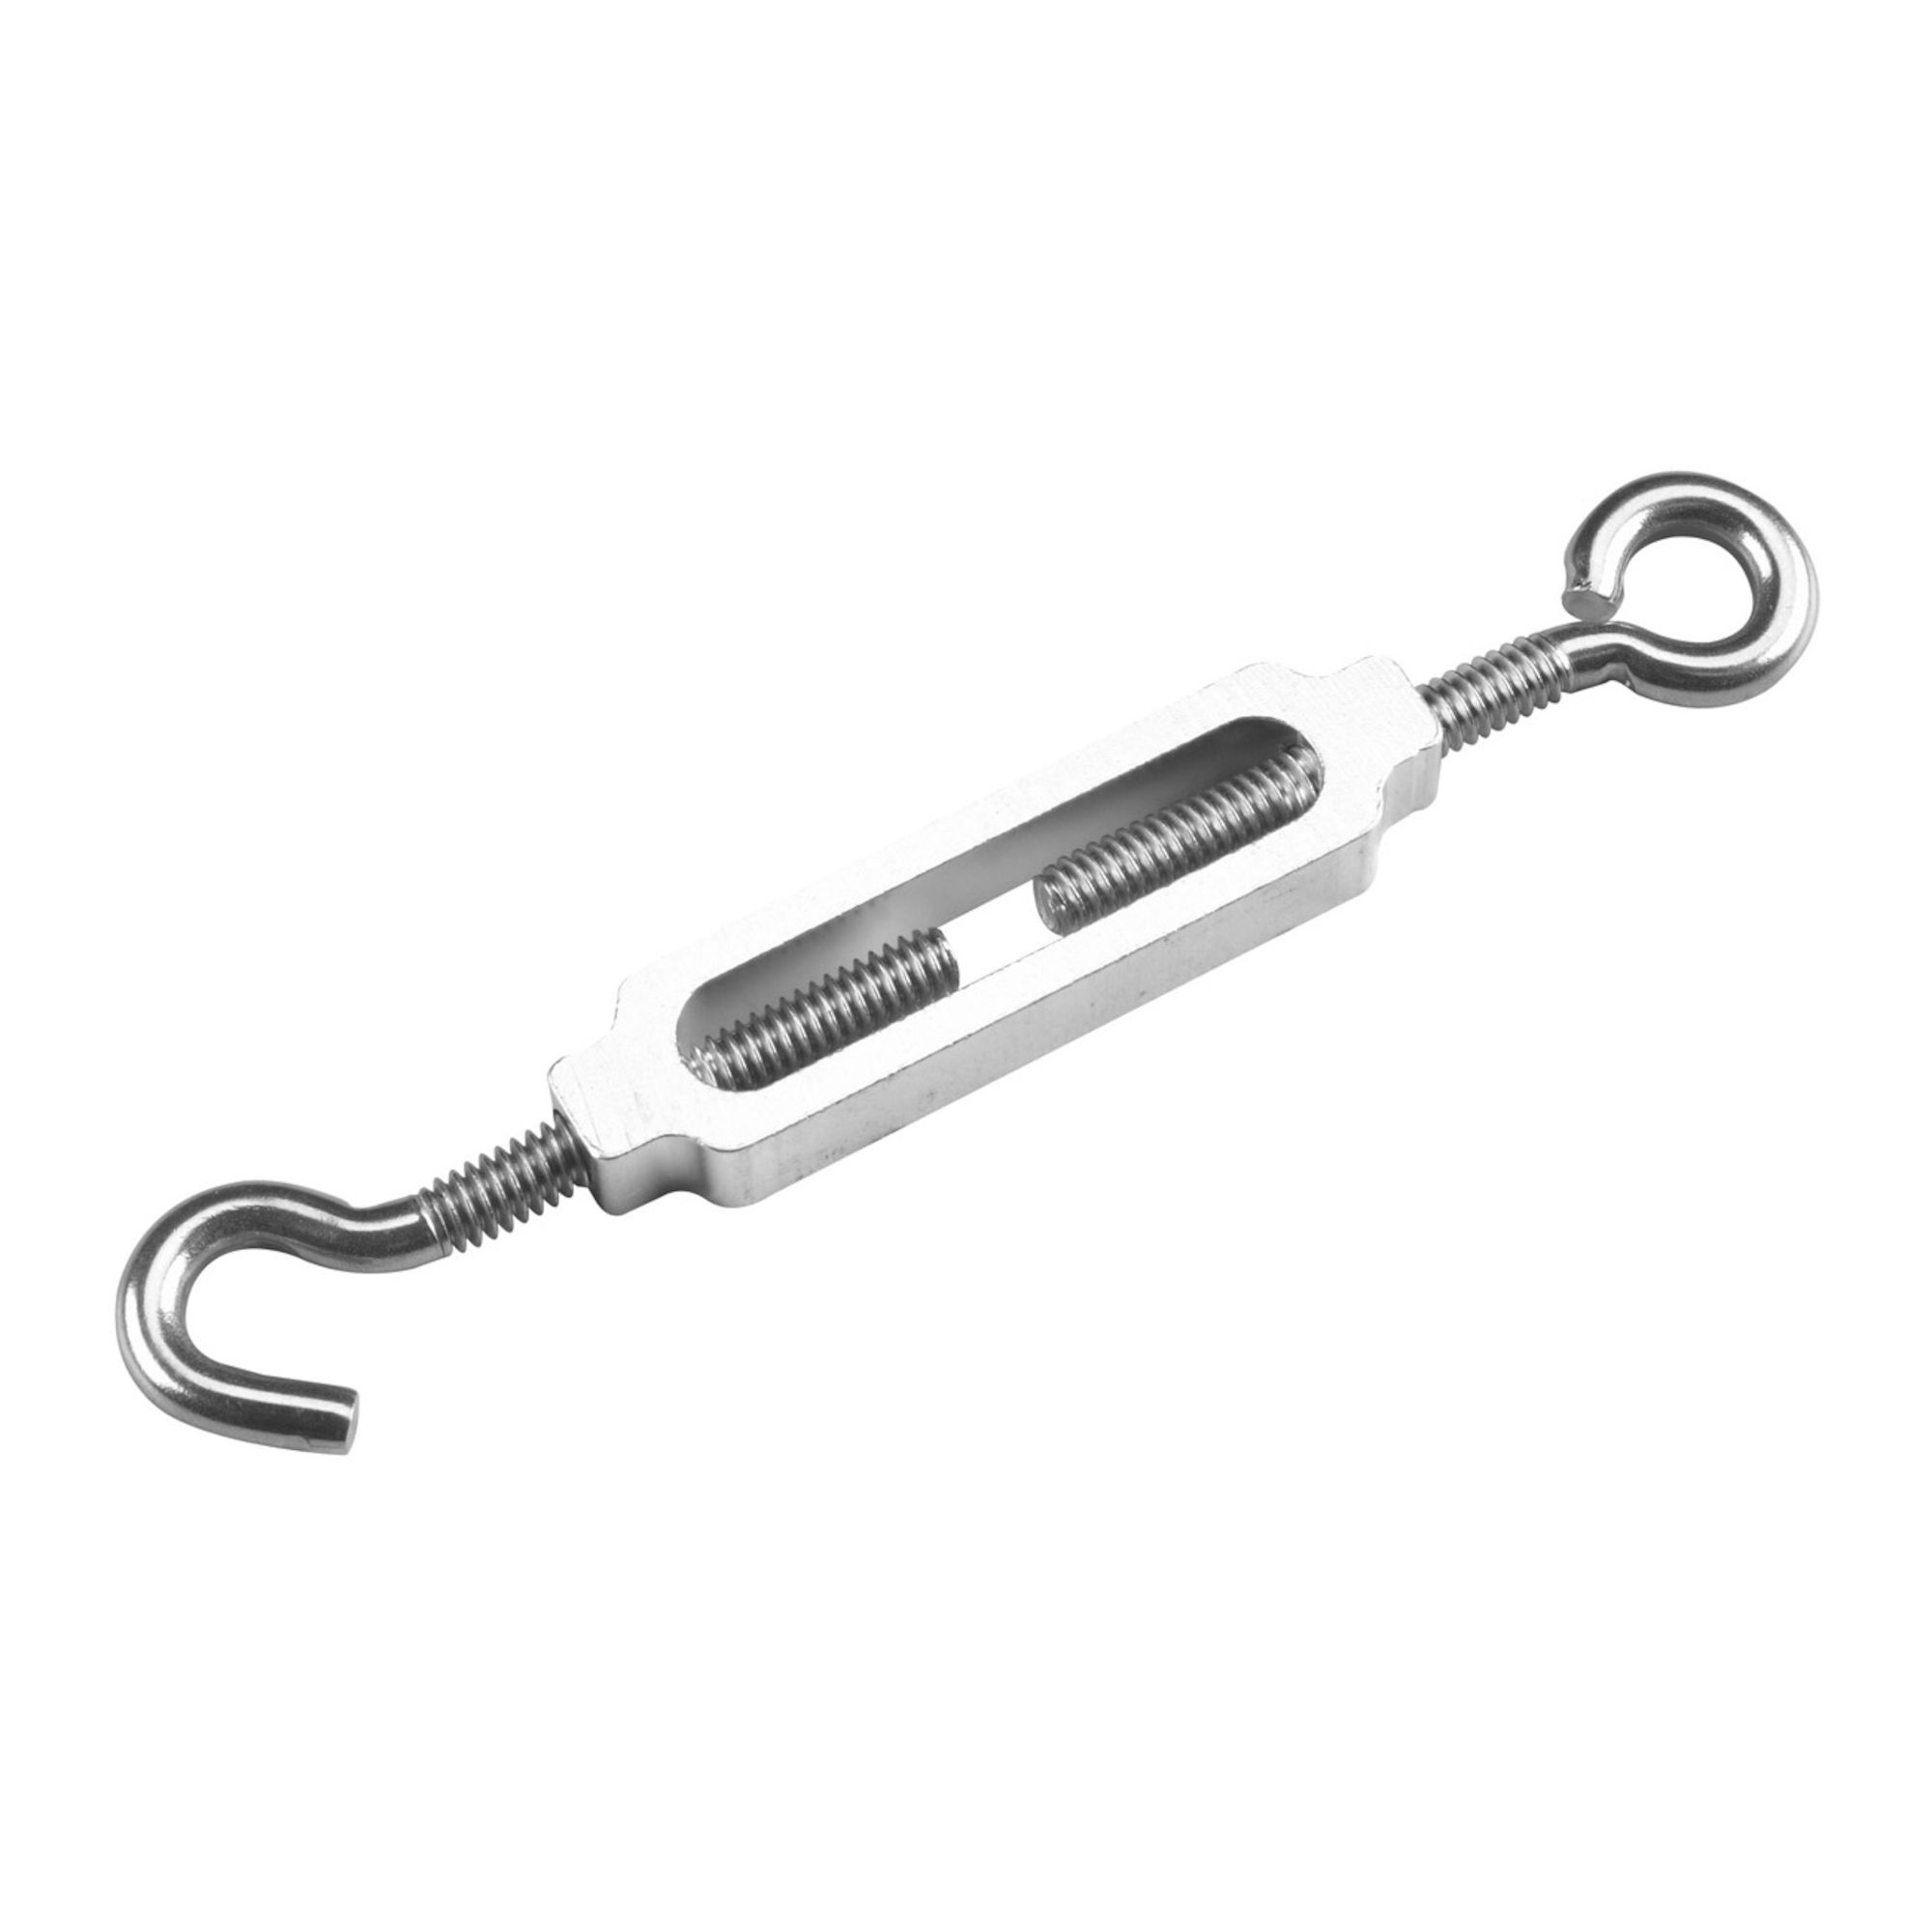 Hook by eye turnbuckle - Stainless Steel - 1/4 x 7 5/8 from